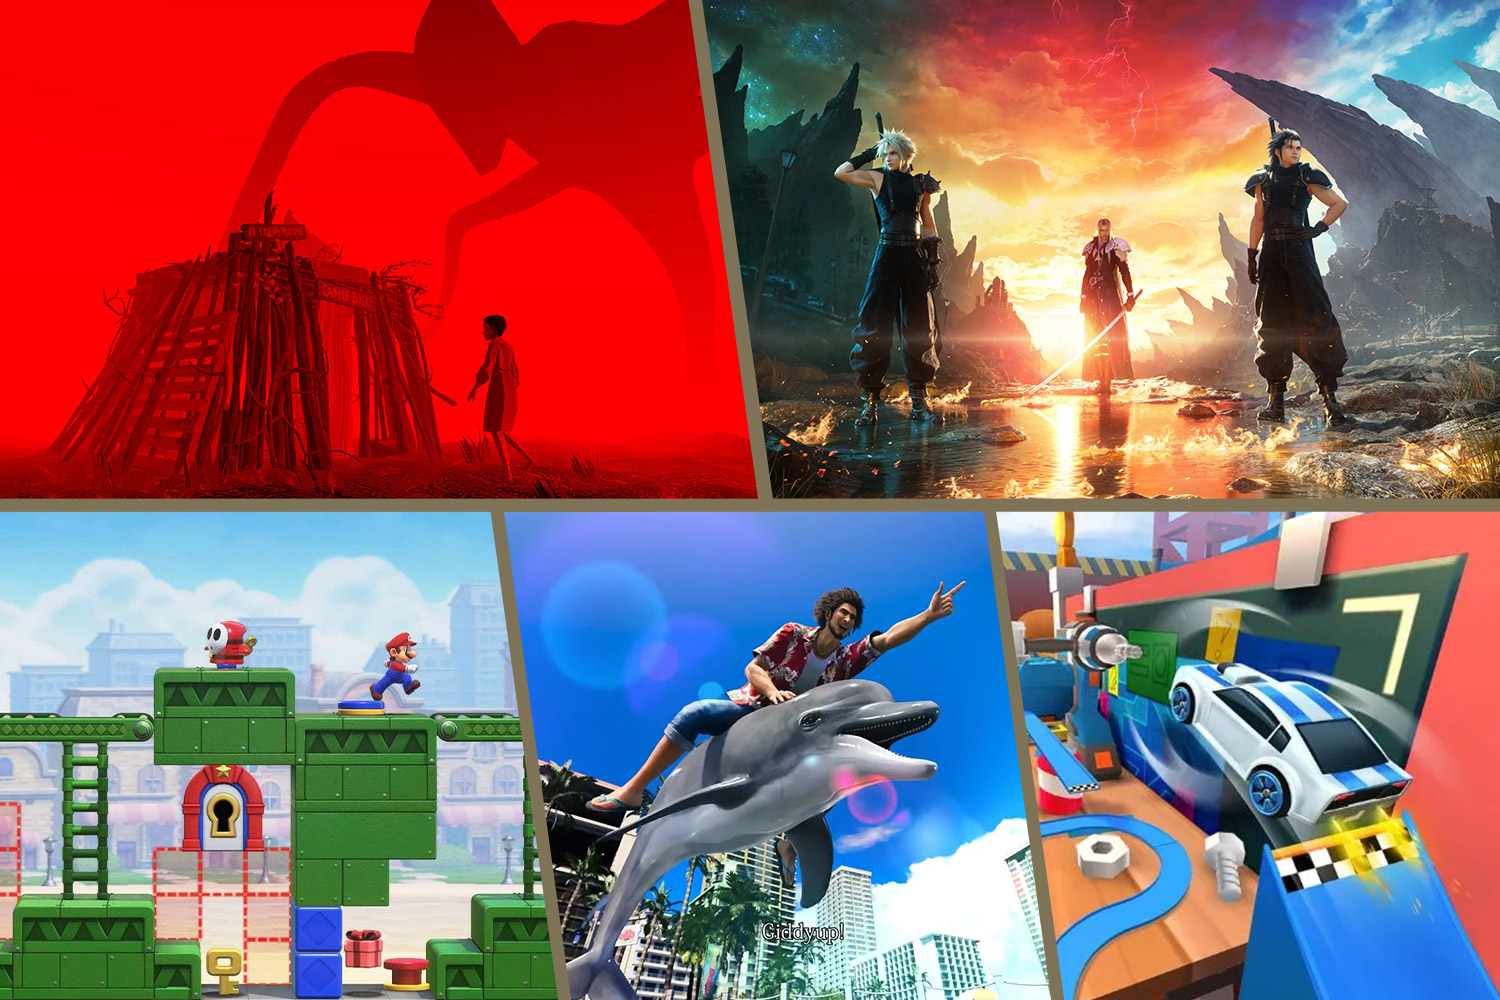 Collage of video games and VR games